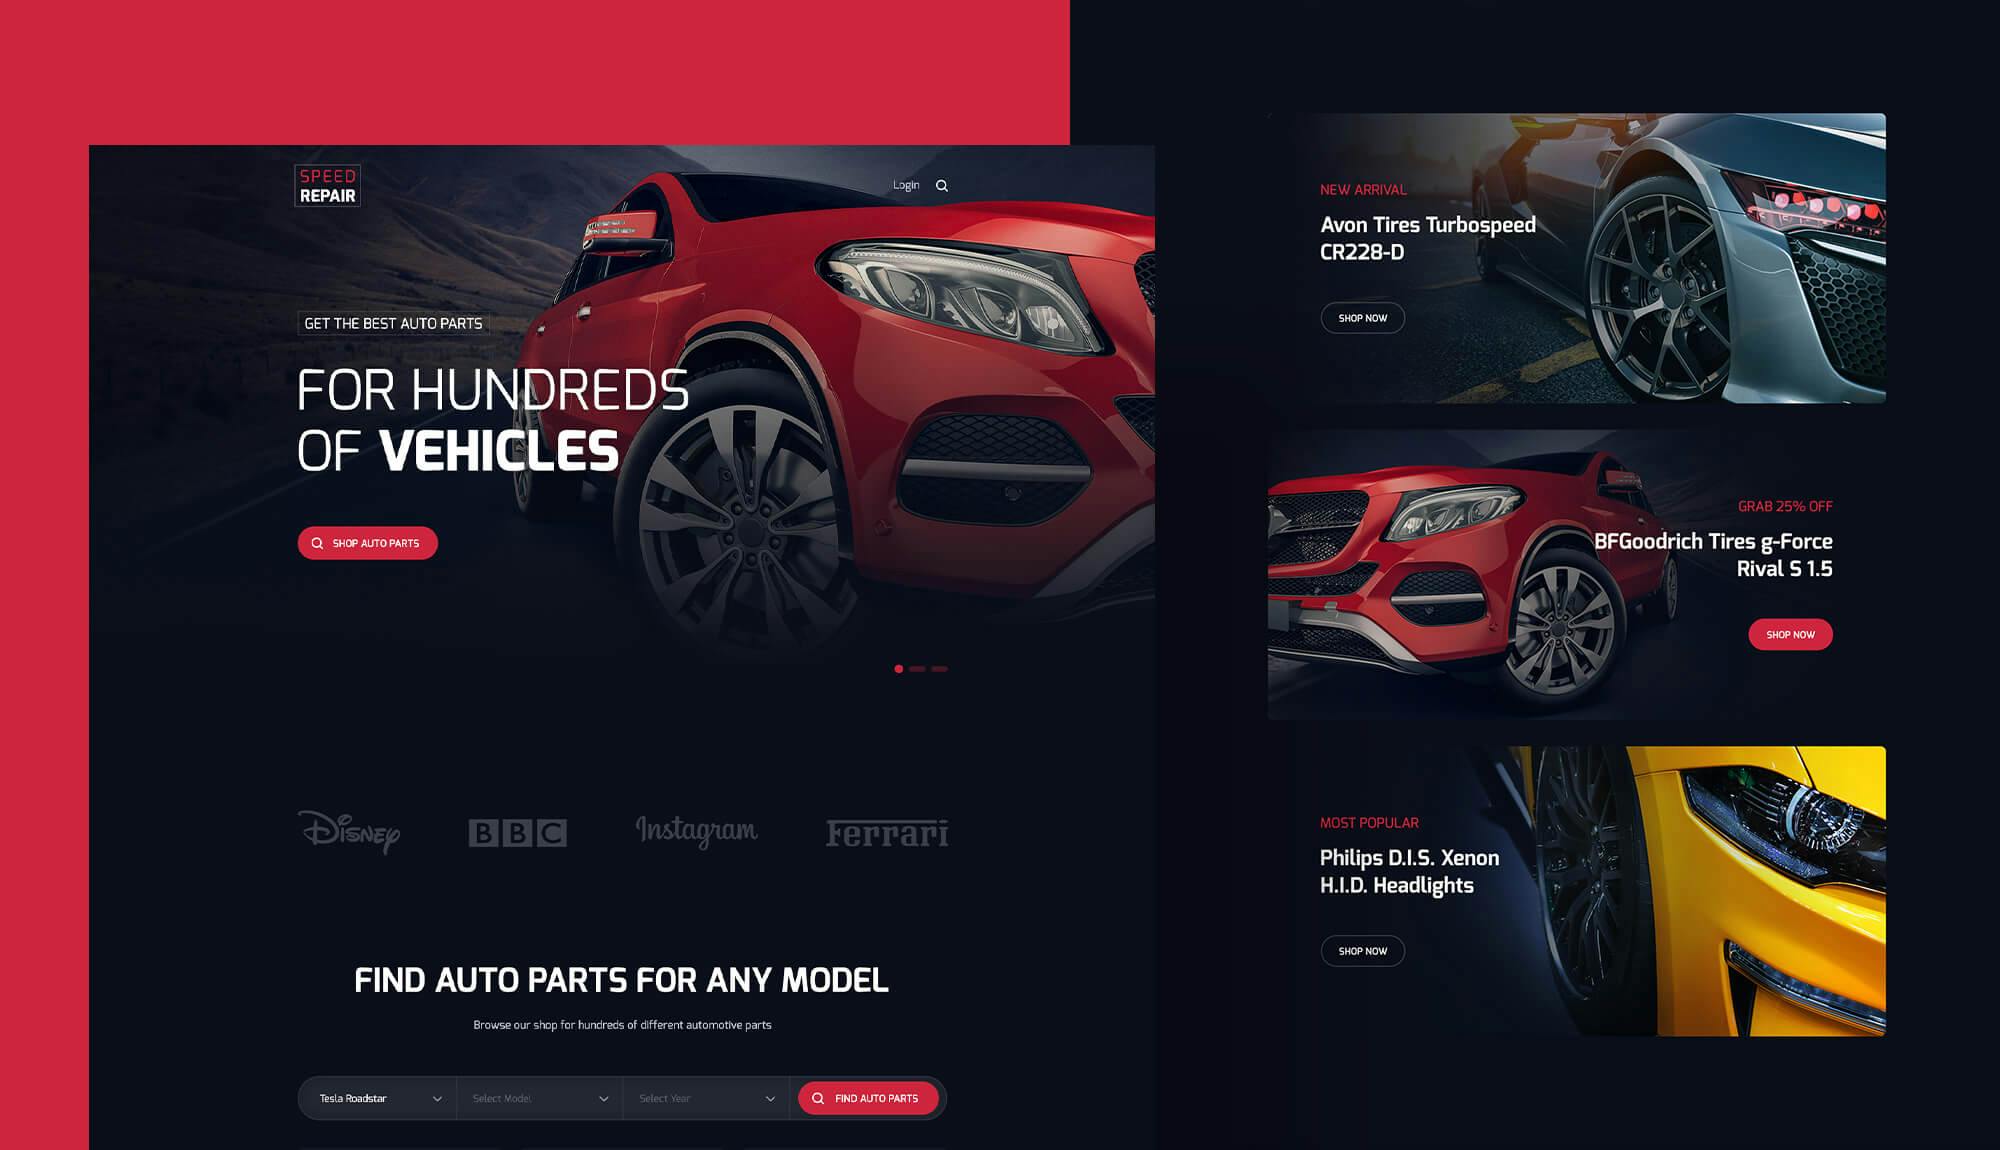 Speed - Auto Parts Shop Website | Templately